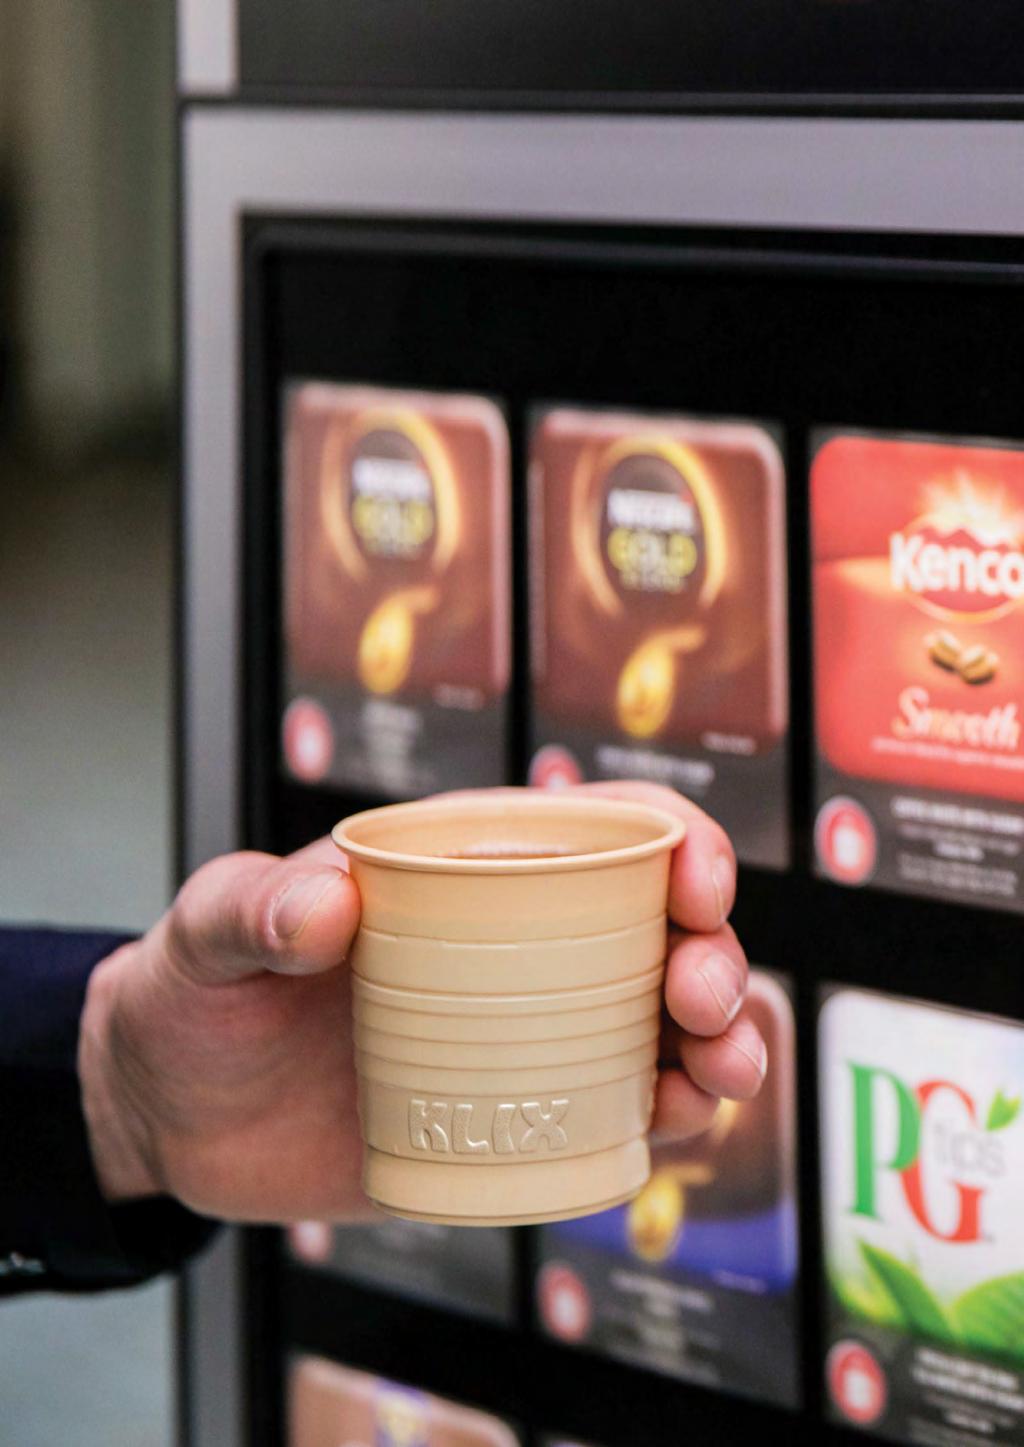 AN IN-CUP VENDING SYSTEM that KEEPS YOUR WORKDAY MOVING Your business moves fast. So we created an in-cup vending solution to keep pace.